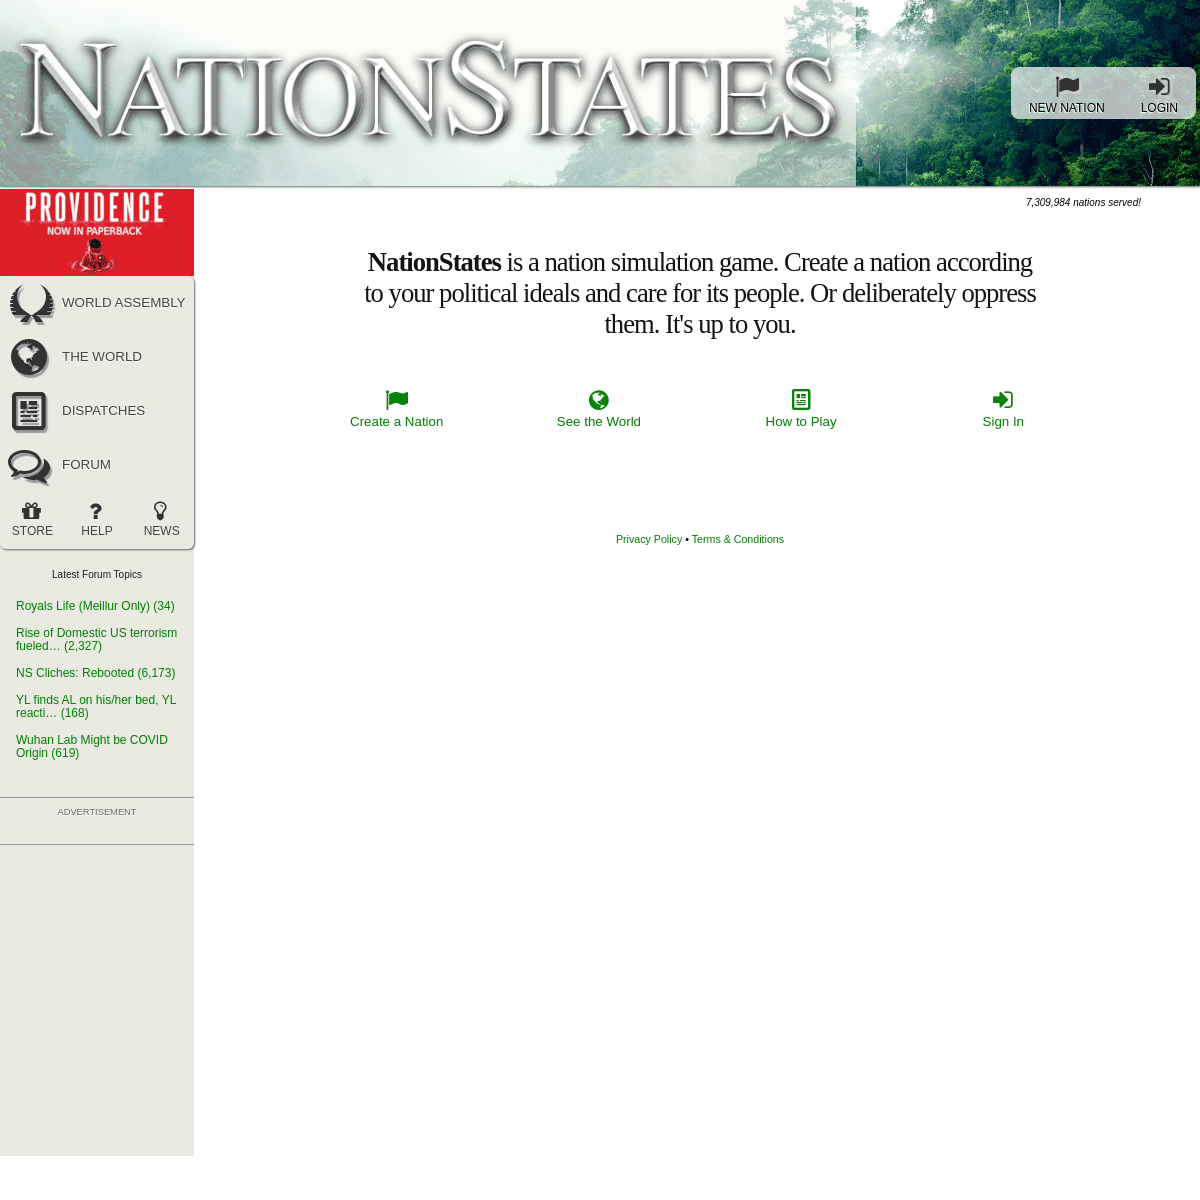 A complete backup of https://nationstates.net